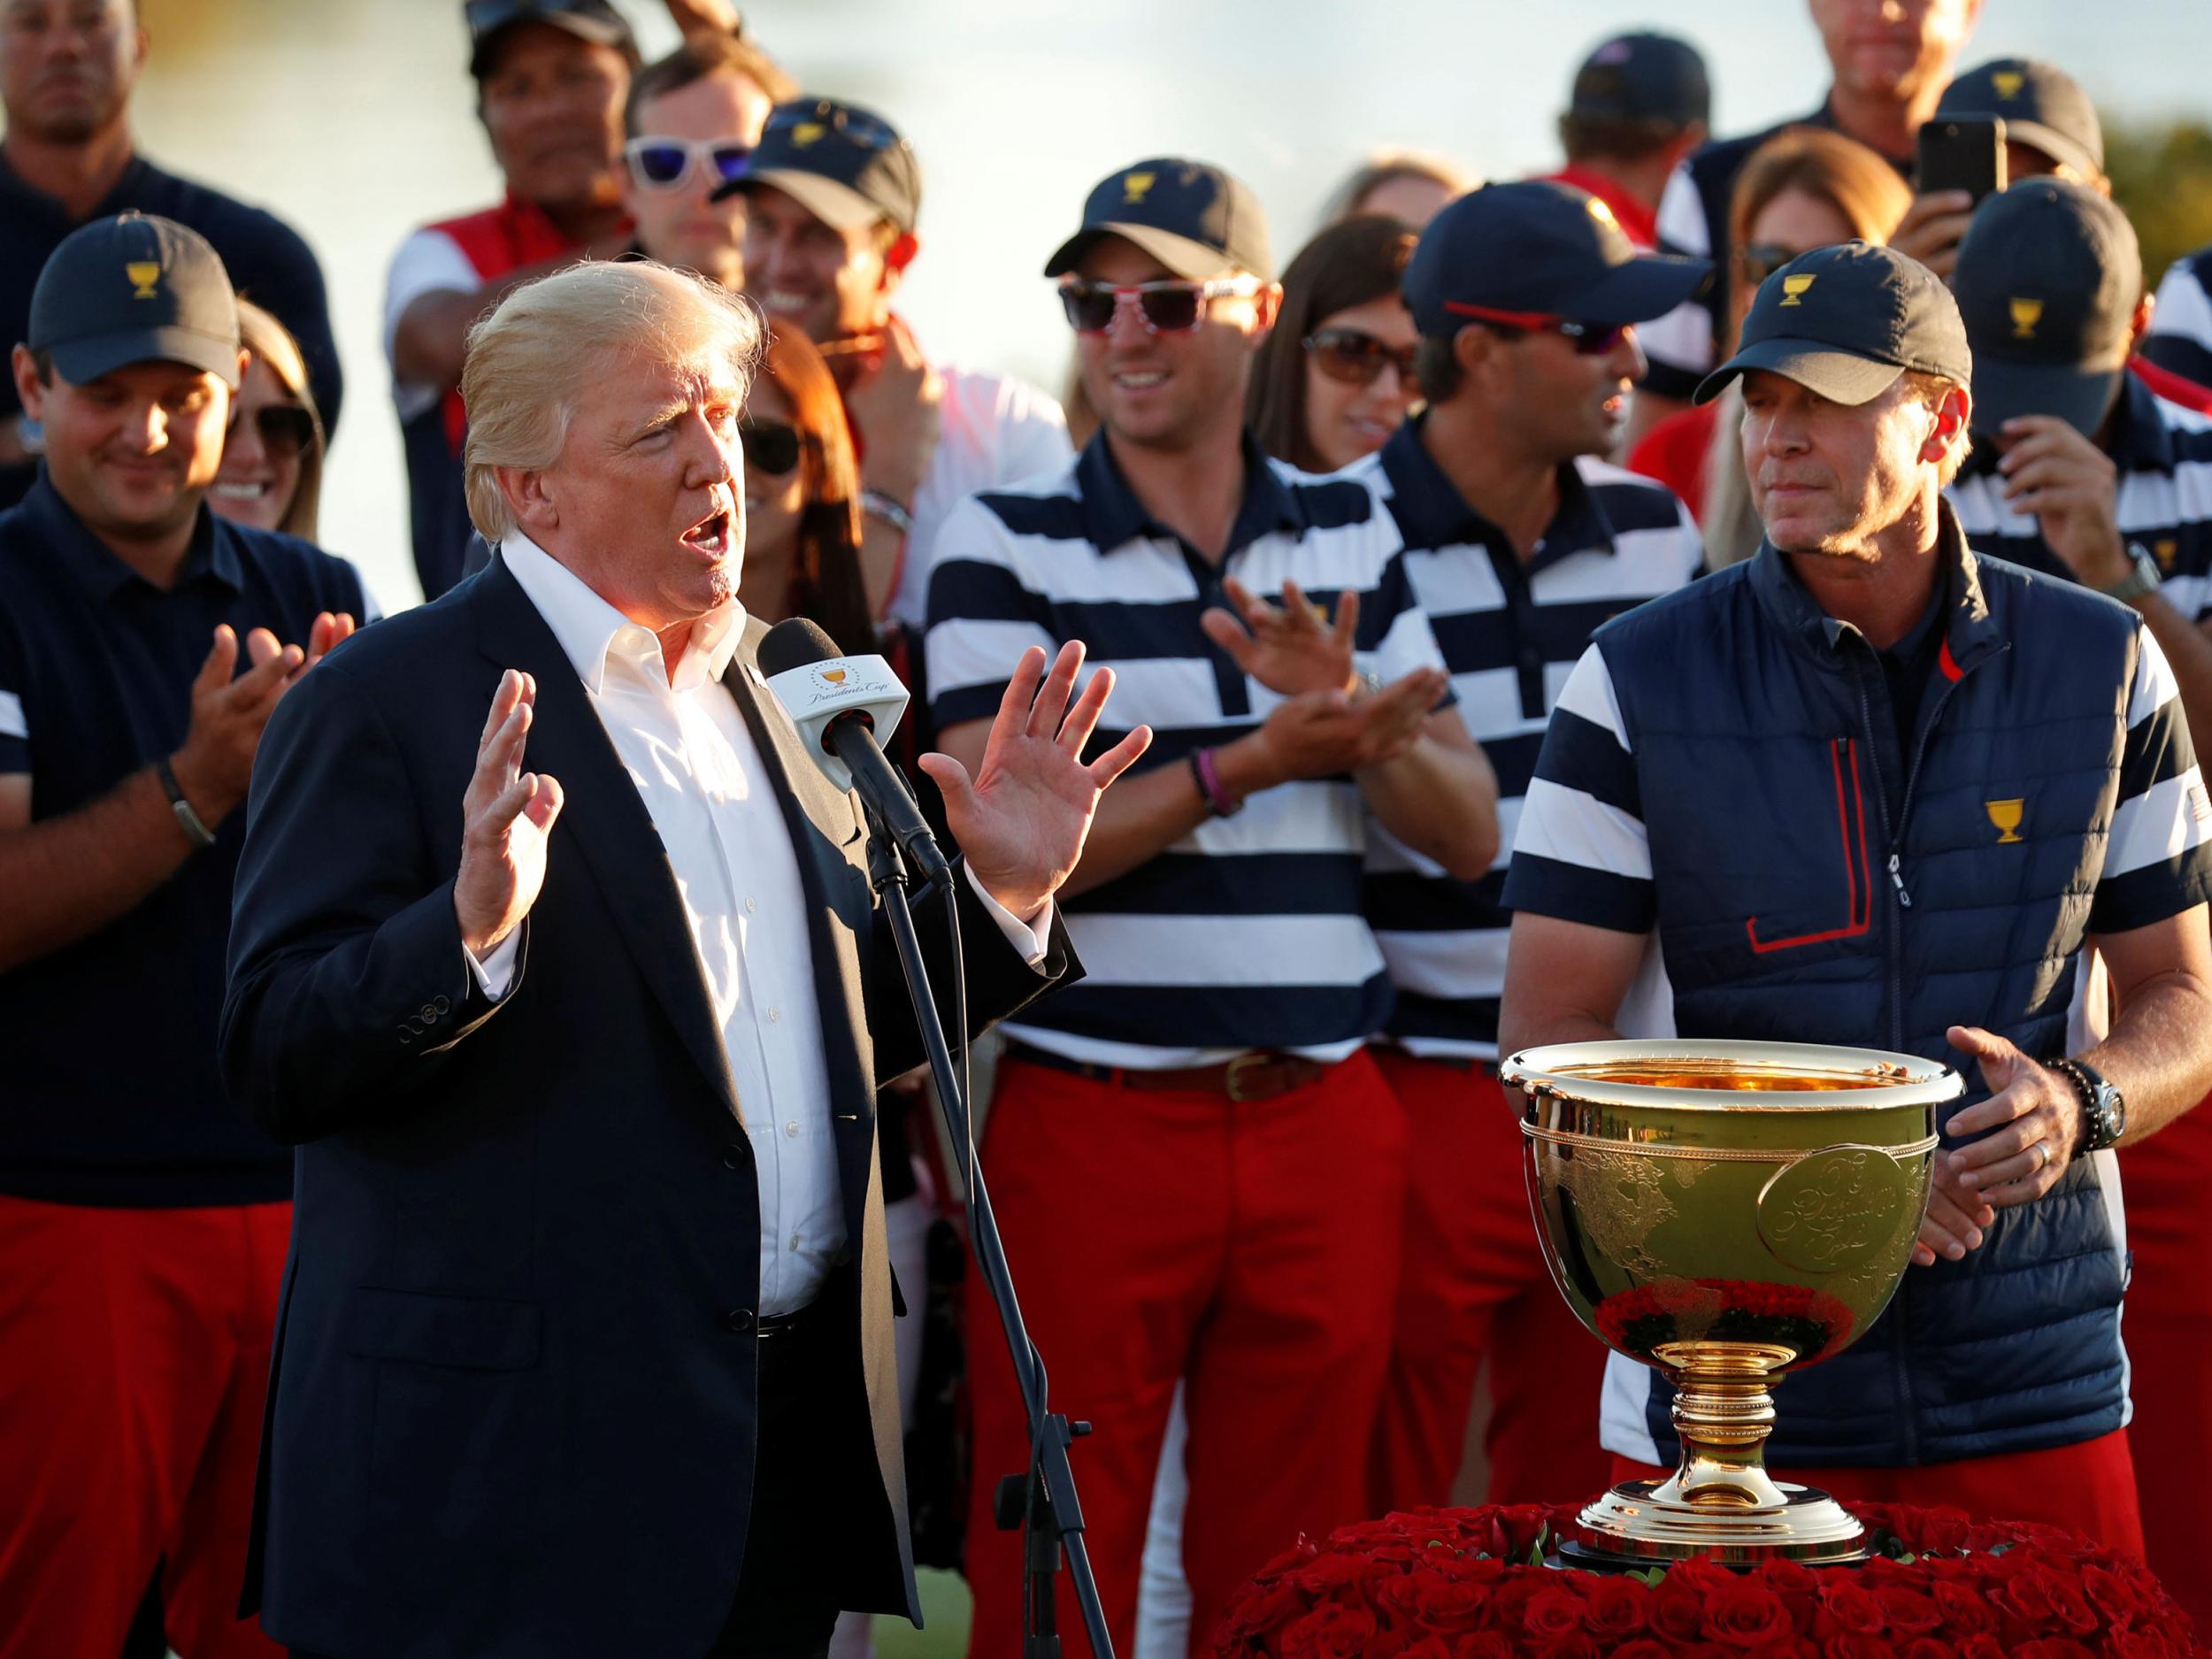 US President Donald Trump presents the trophy to the US team captain Steve Stricker at the conclusion of the Presidents Cup golf tournament at Liberty National Golf Club in Jersey City, New Jersey